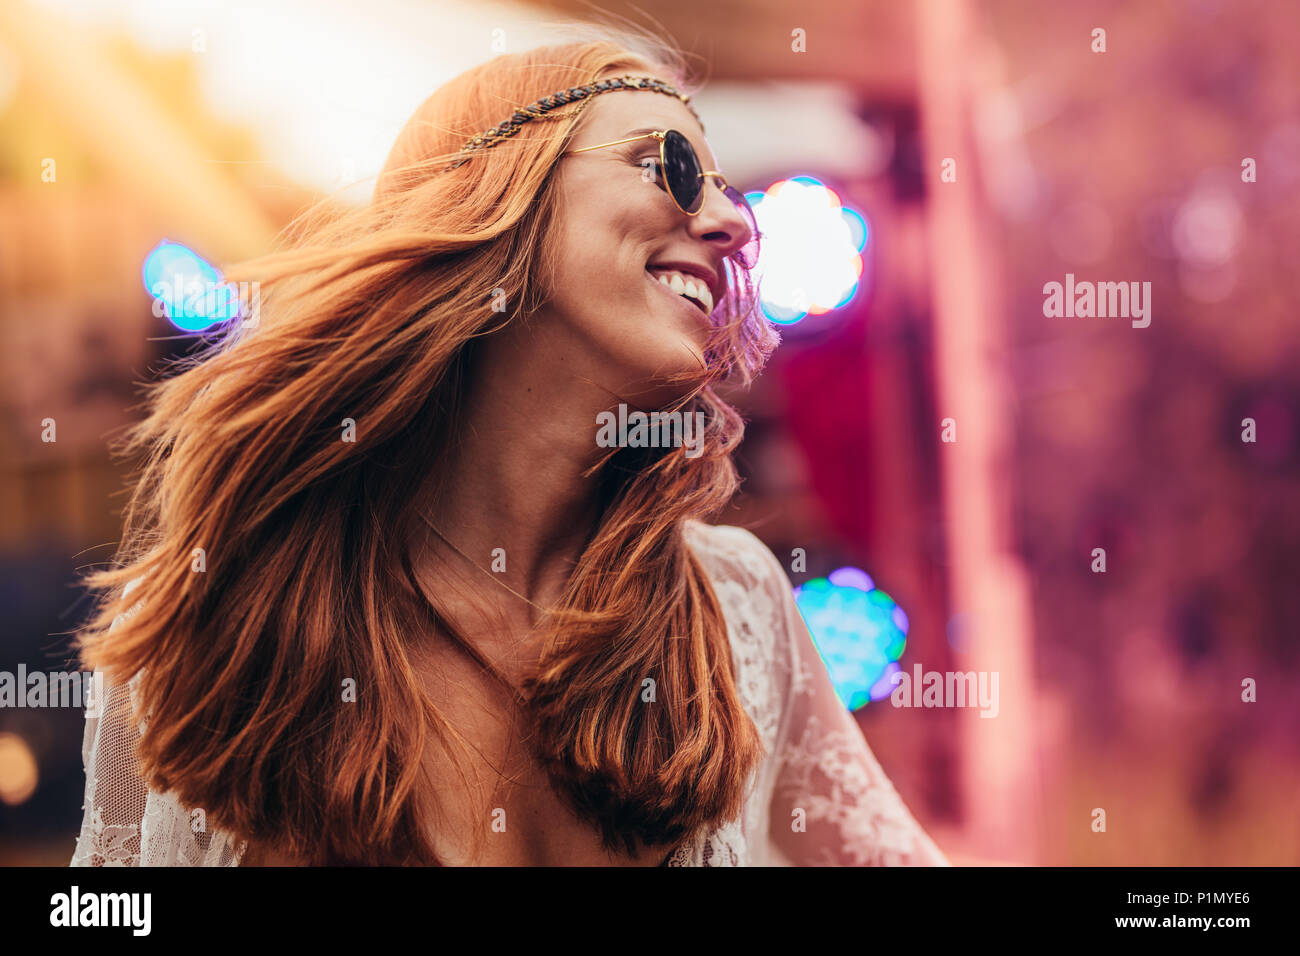 Beautiful young hippie woman enjoying at music festival outdoors. Woman in retro look dancing at music festival. Stock Photo